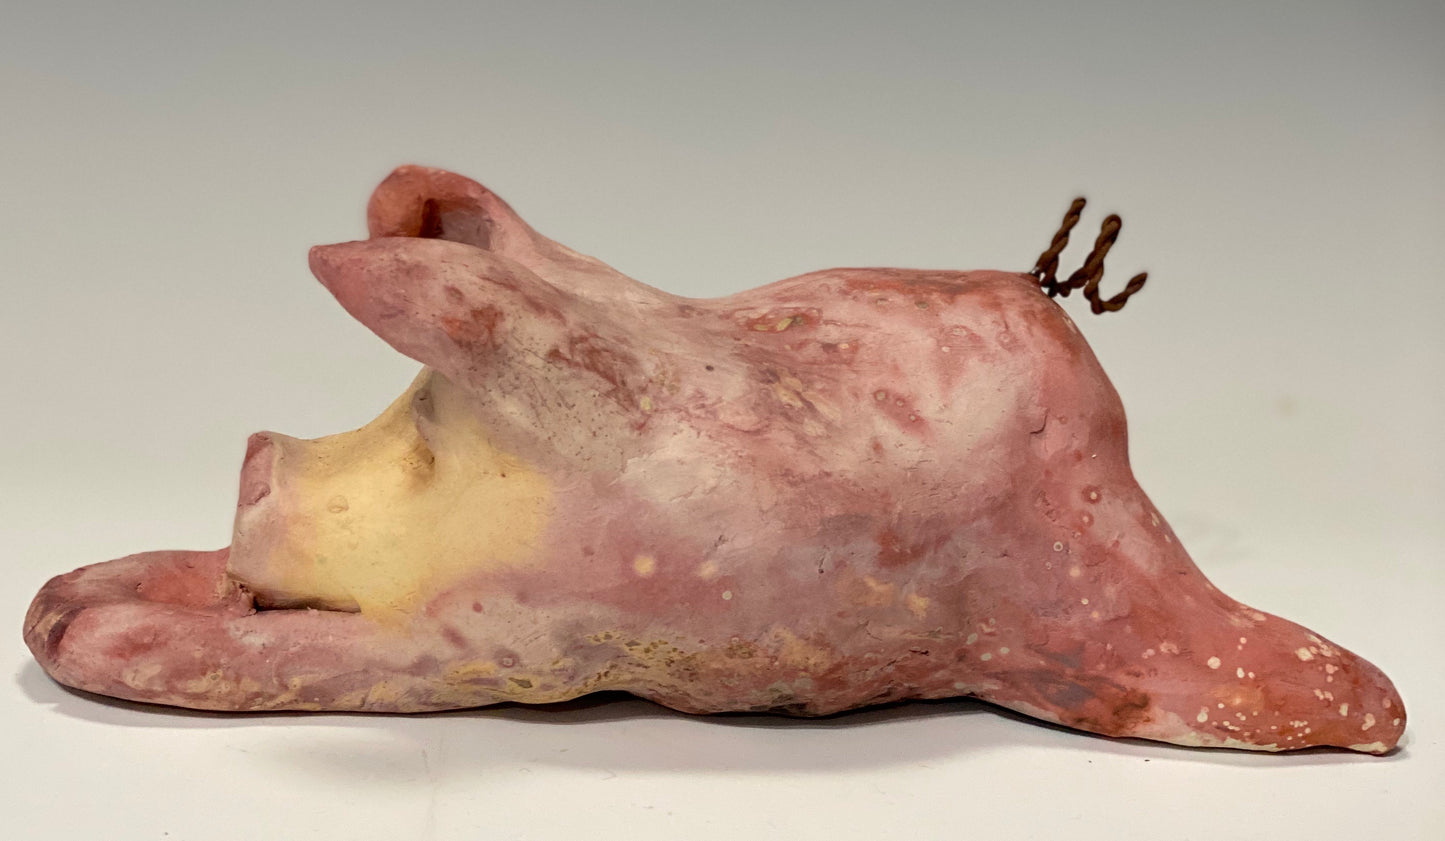 This Little Piggy named Olivia  is  approx. 4" x 5' x 6" and weighs 1.8 lbs. Olivia has a matte and satin pinkish complexion. Olivia little curly tail is made of wire.